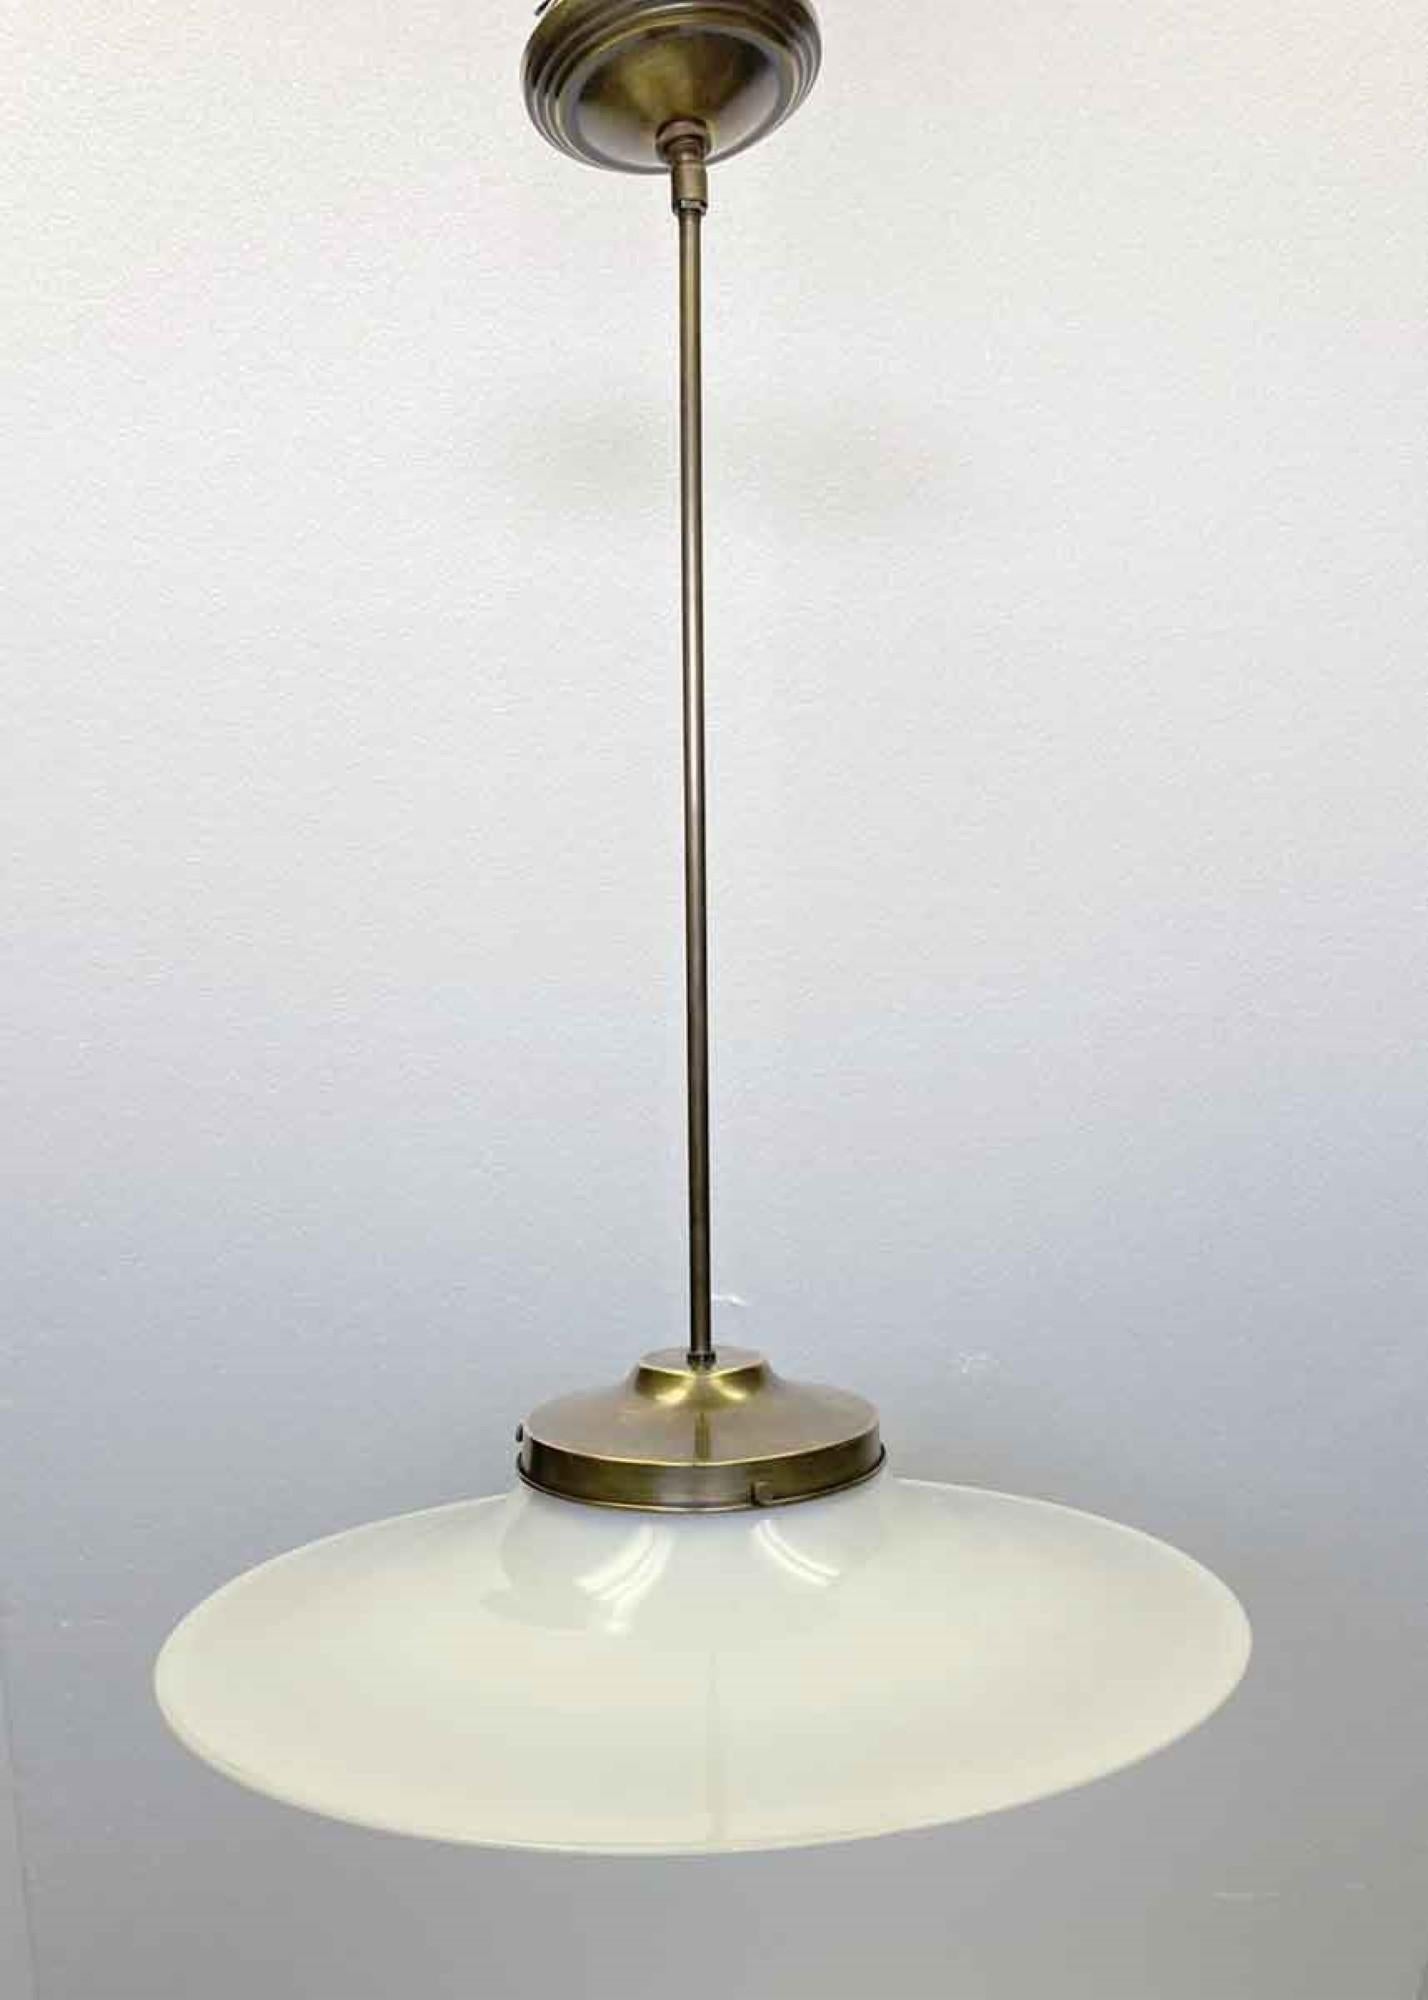 Original 1910s rare flat brim shaped white milk glass shade pictured with a newly configured and wired antique brass finished pole fixture. Forward looking design similar to the Mid-Century Modern styling that started to appear in the 1950s. Price